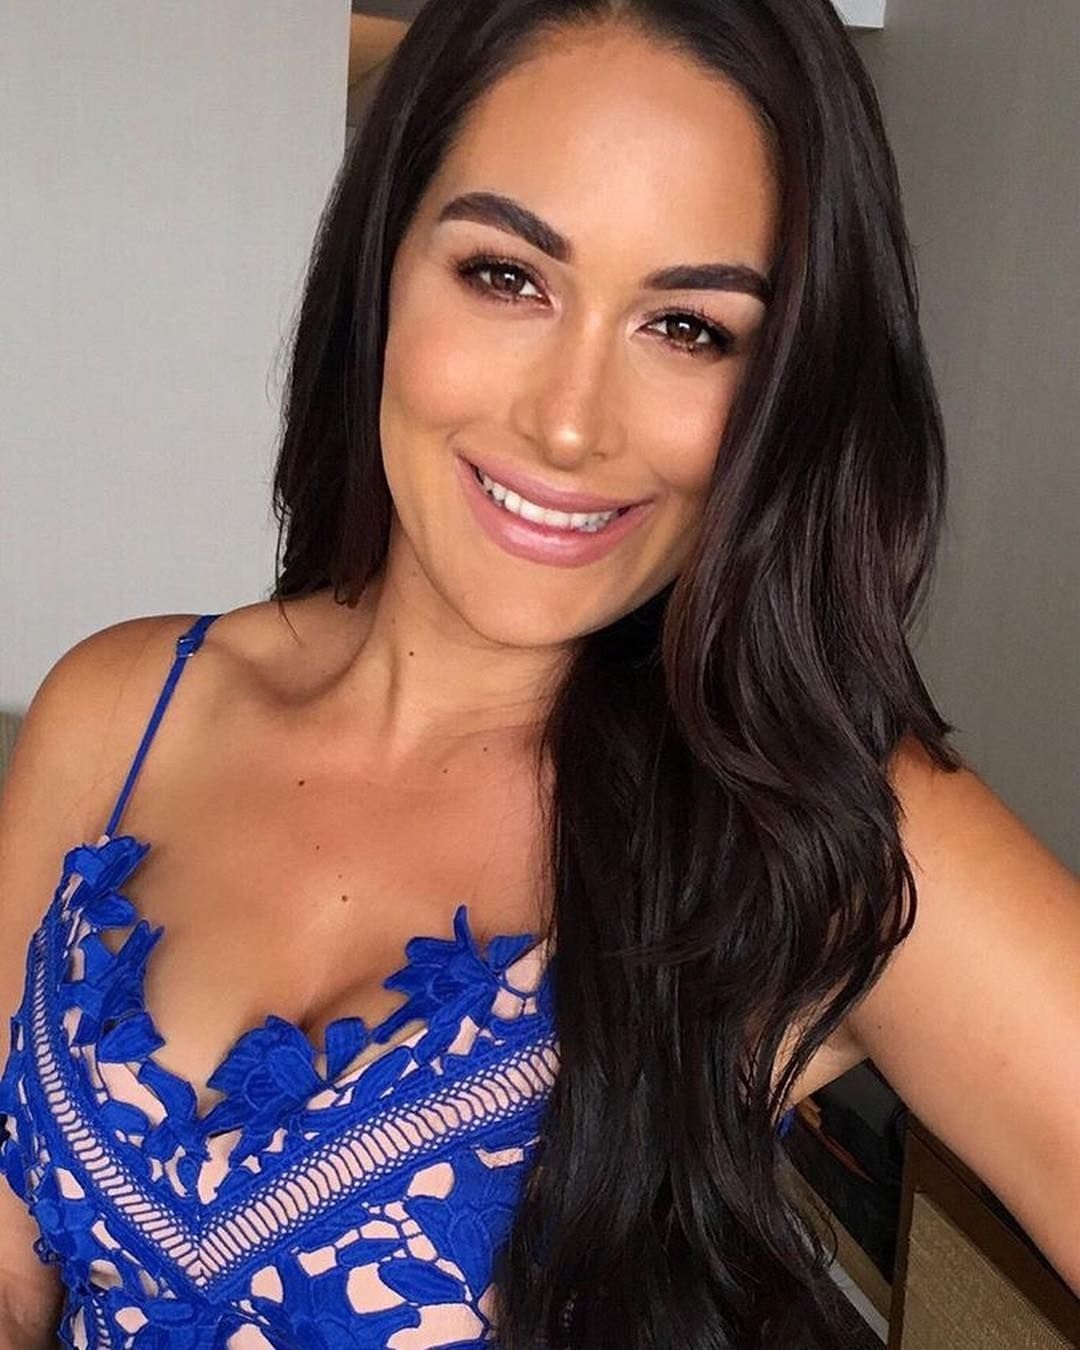 Brie and Nikki Bella on first year raising their infant sons